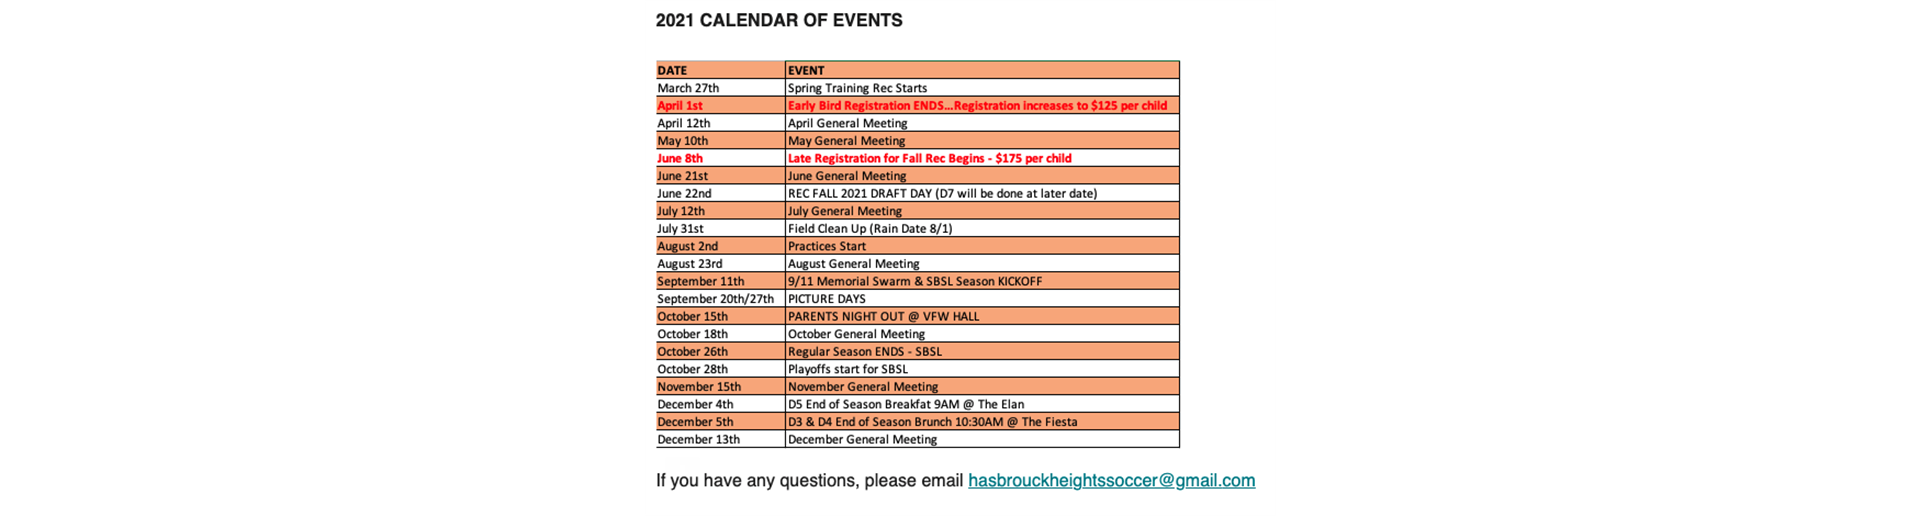 HHSA CALENDAR OF EVENTS